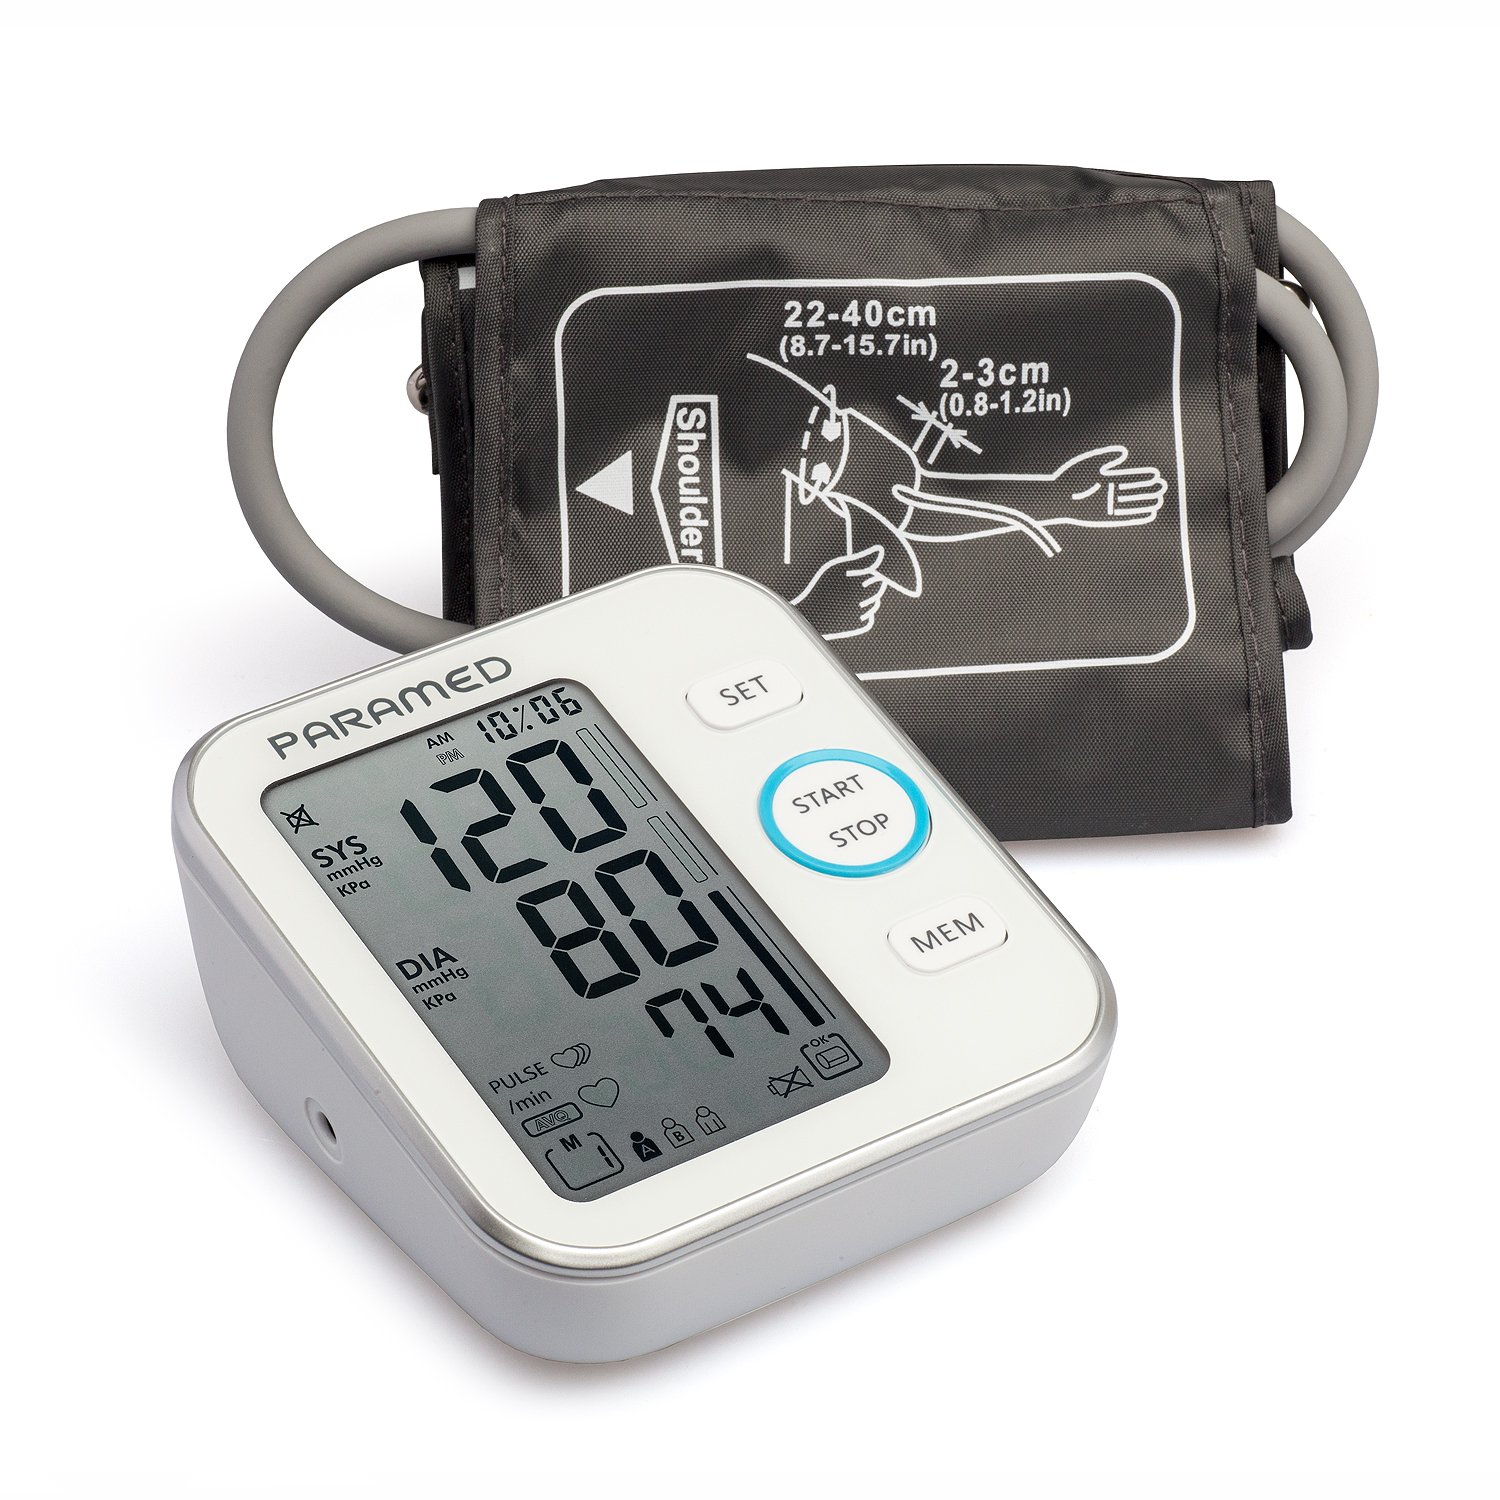 https://www.dontwasteyourmoney.com/wp-content/uploads/2020/03/paramed-automatic-upper-arm-blood-pressure-monitor-blood-pressure-monitor-for-home-use.jpg